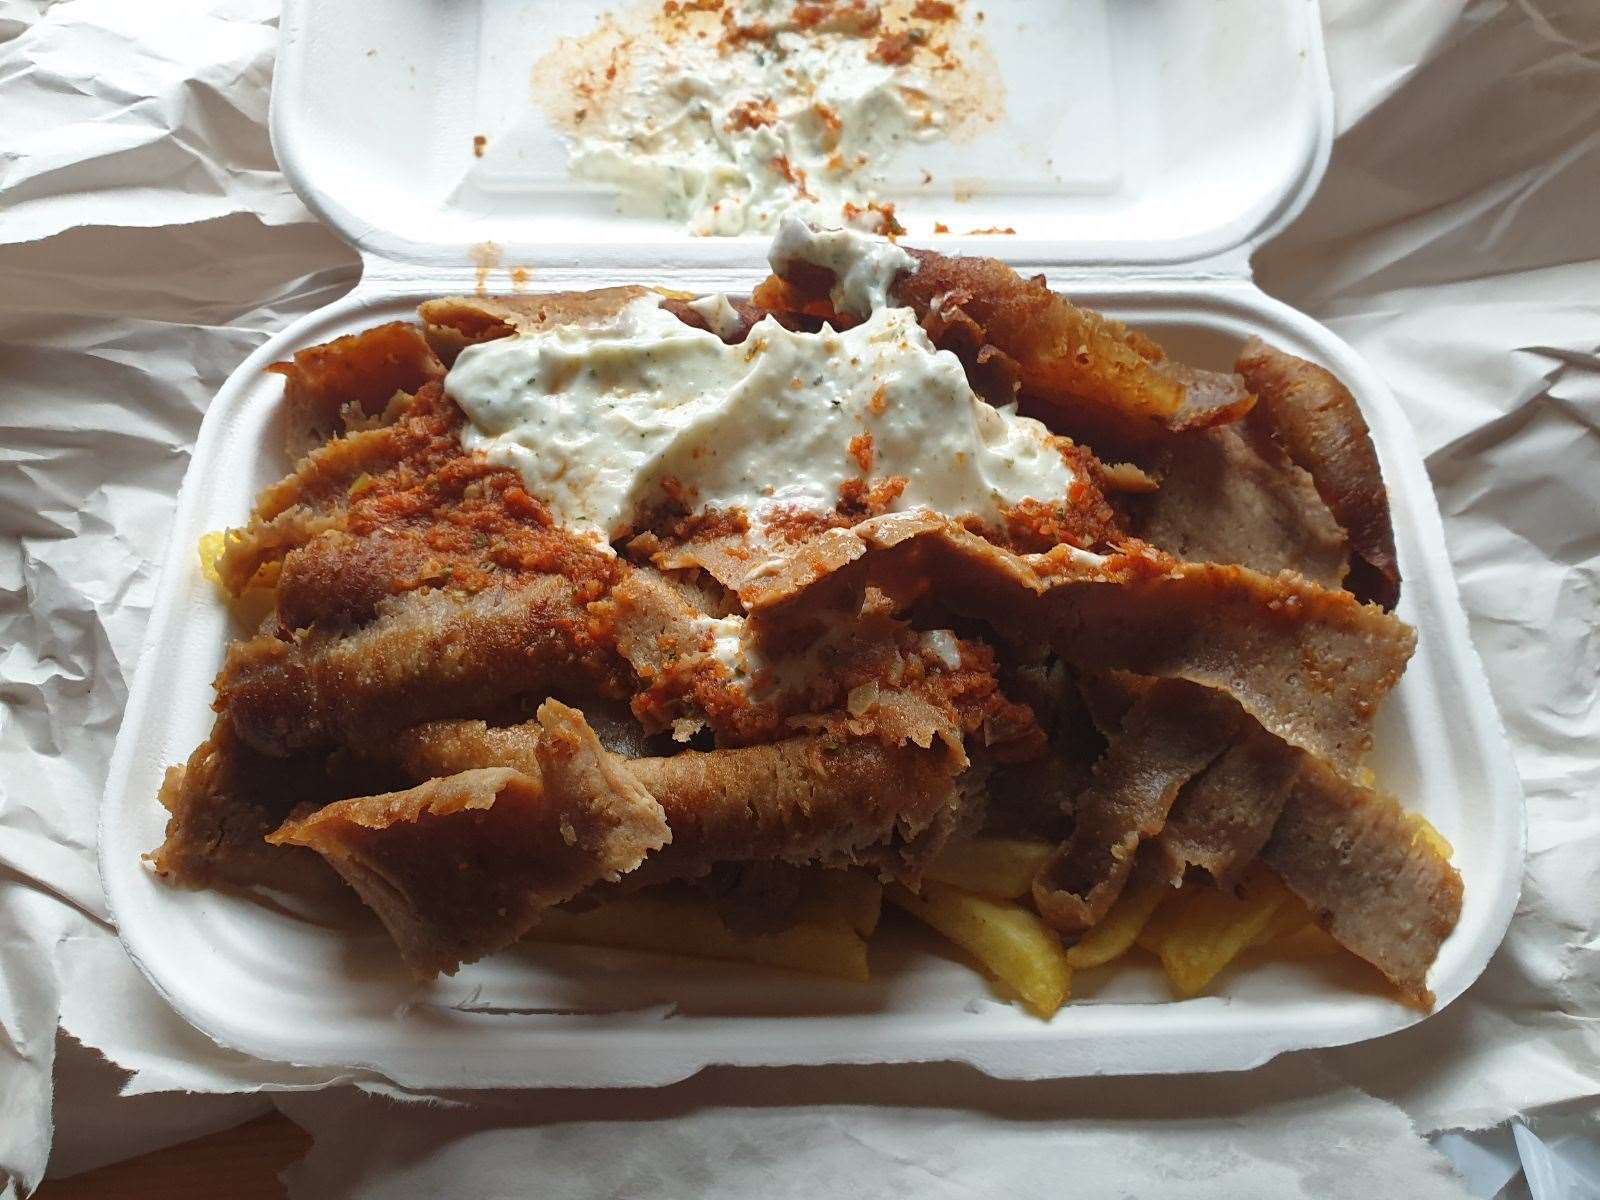 A doner kebab and chips from Bay Kebabs in Herne Bay High Street